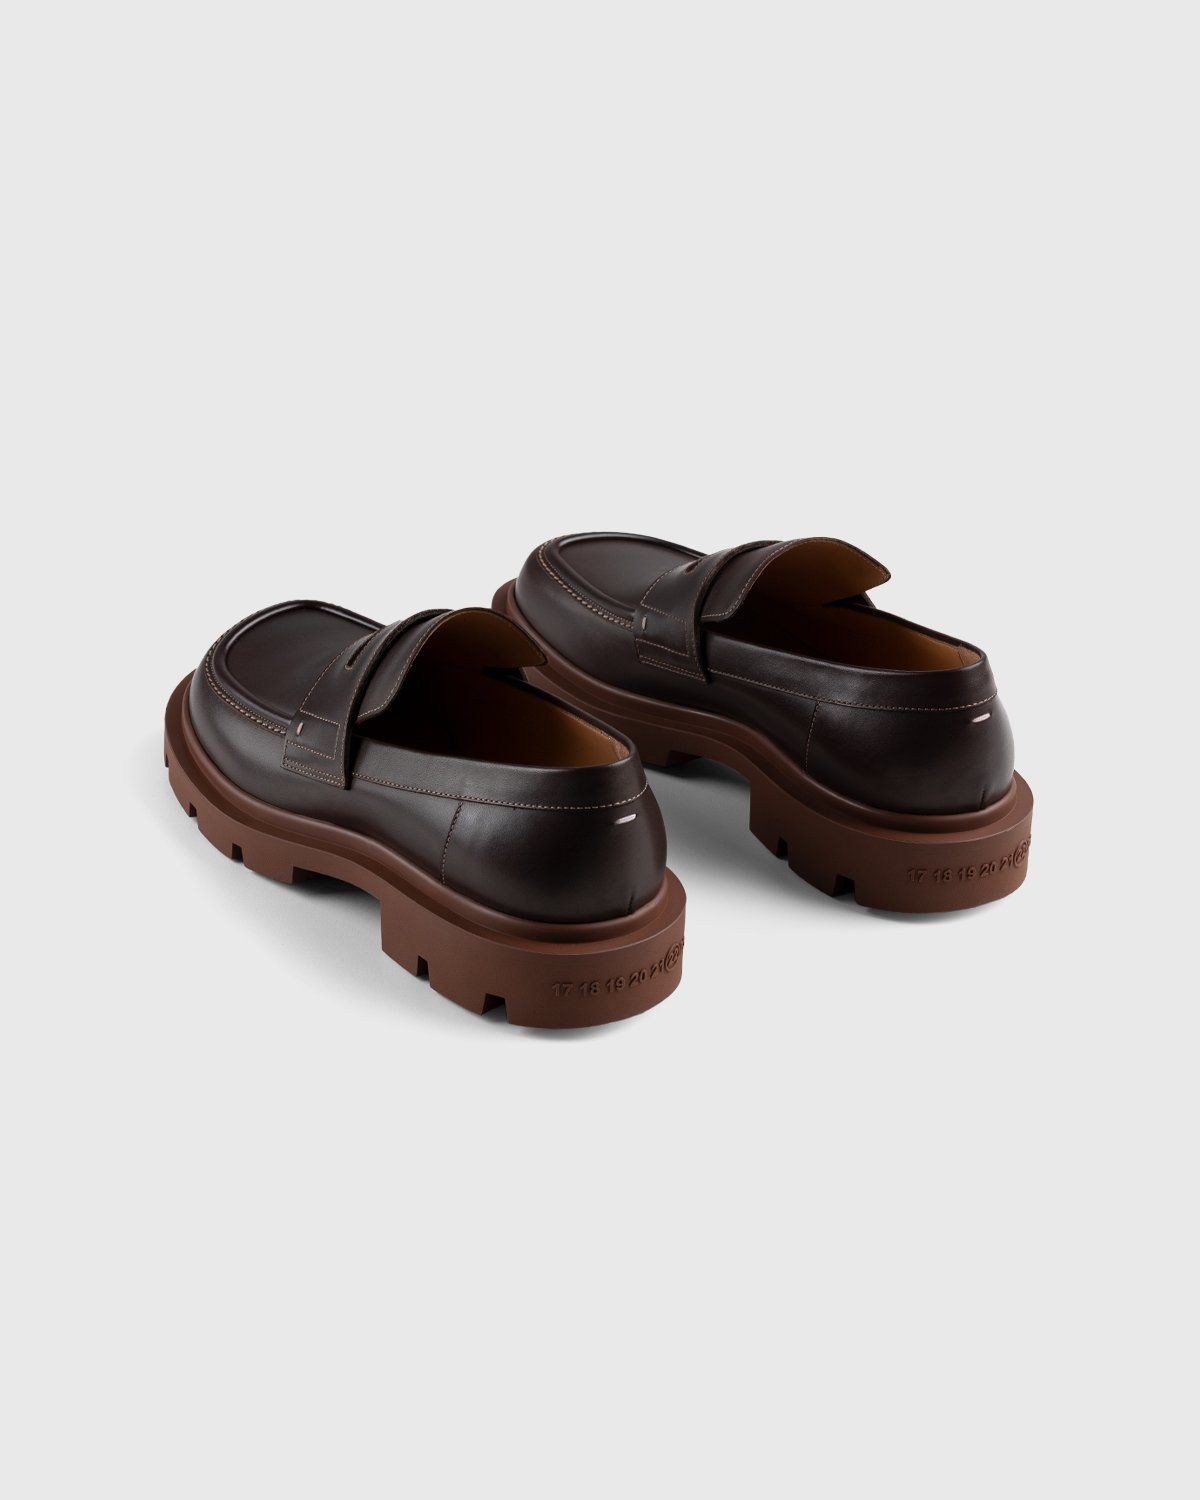 Maison Margiela – Lug Sole Loafers Brown - Shoes - Brown - Image 3